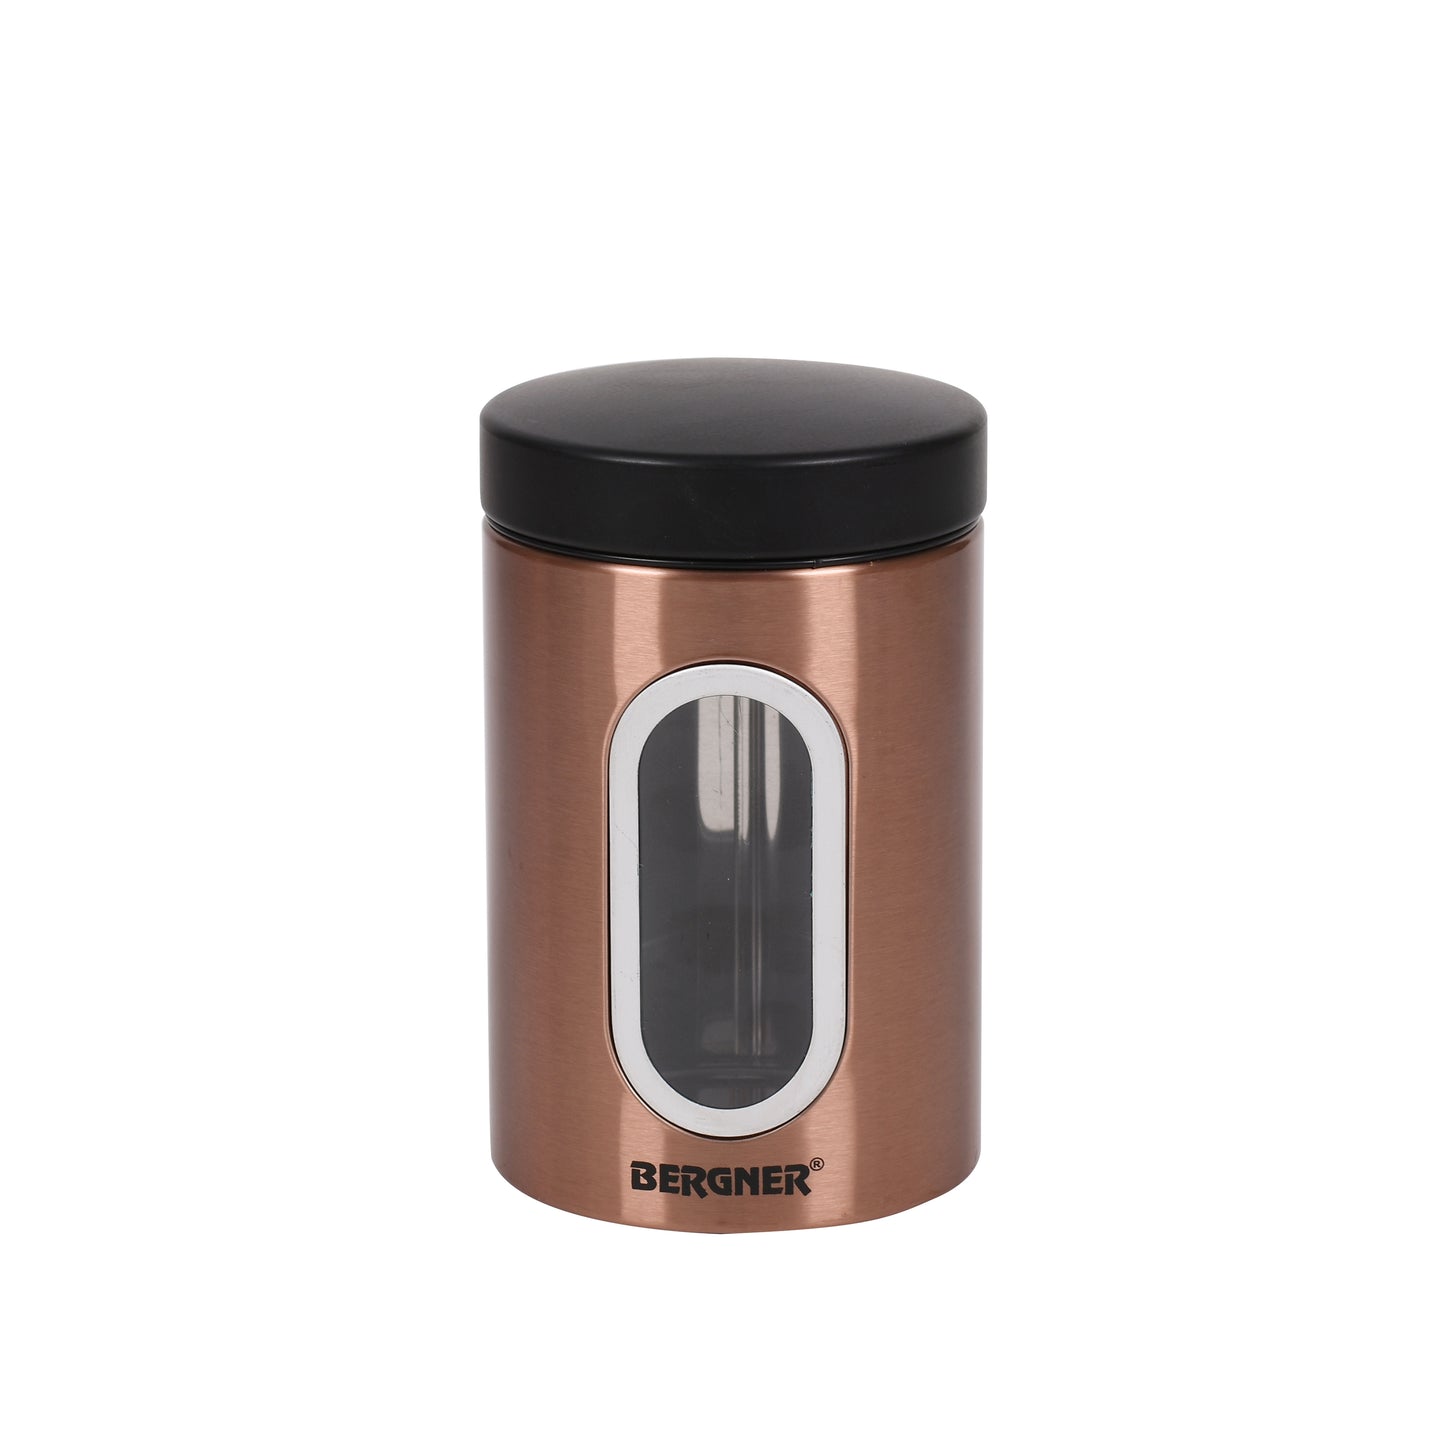 Bergner - Tidy Home Stainless Steel Storage Container 1Pcs (1.1 Ltr) Copper - Ghar Sajawat